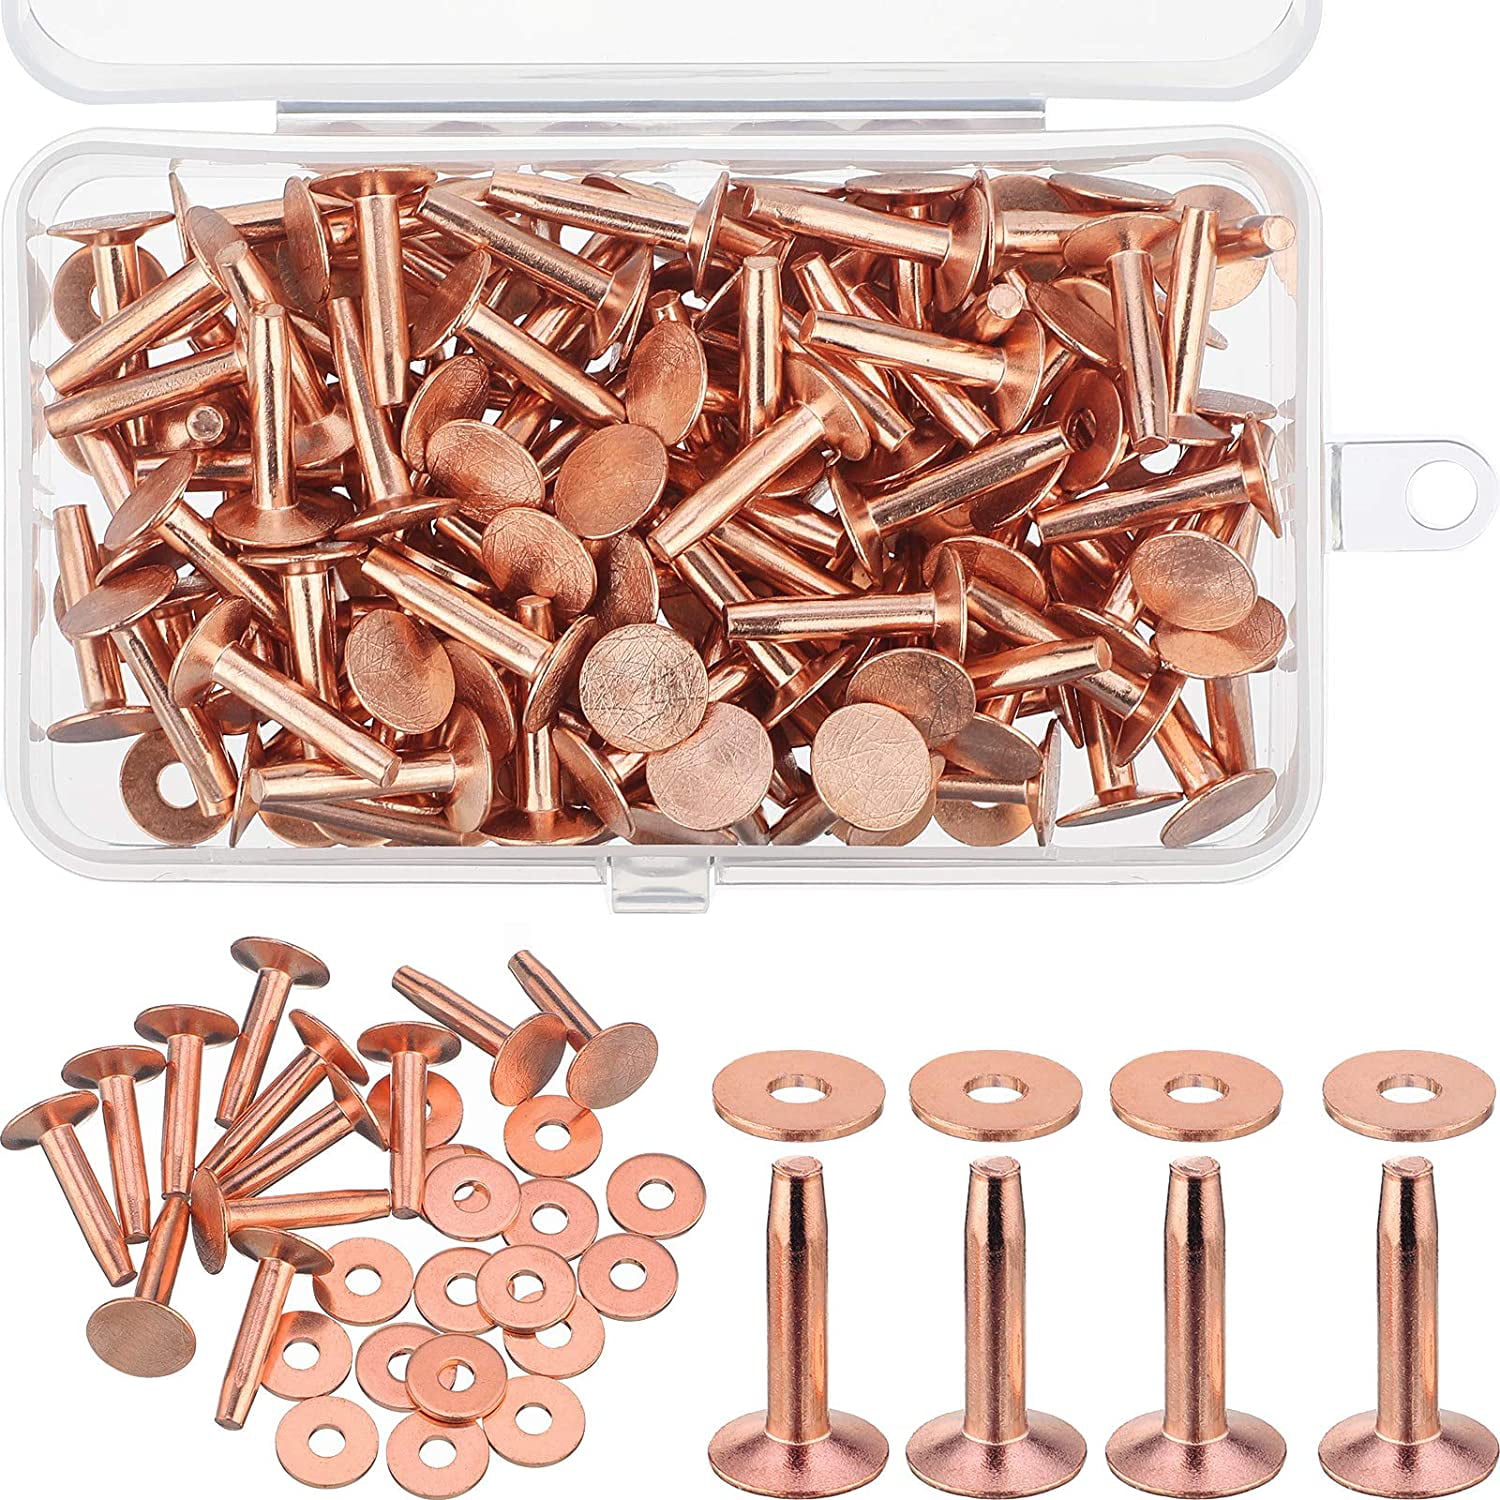 1/2 Inch, Size 9 Copper Rivets for Leather for Belts Wallets Collars Leather DIY Craft Supplies 50 Sets Copper Rivets and Burrs 